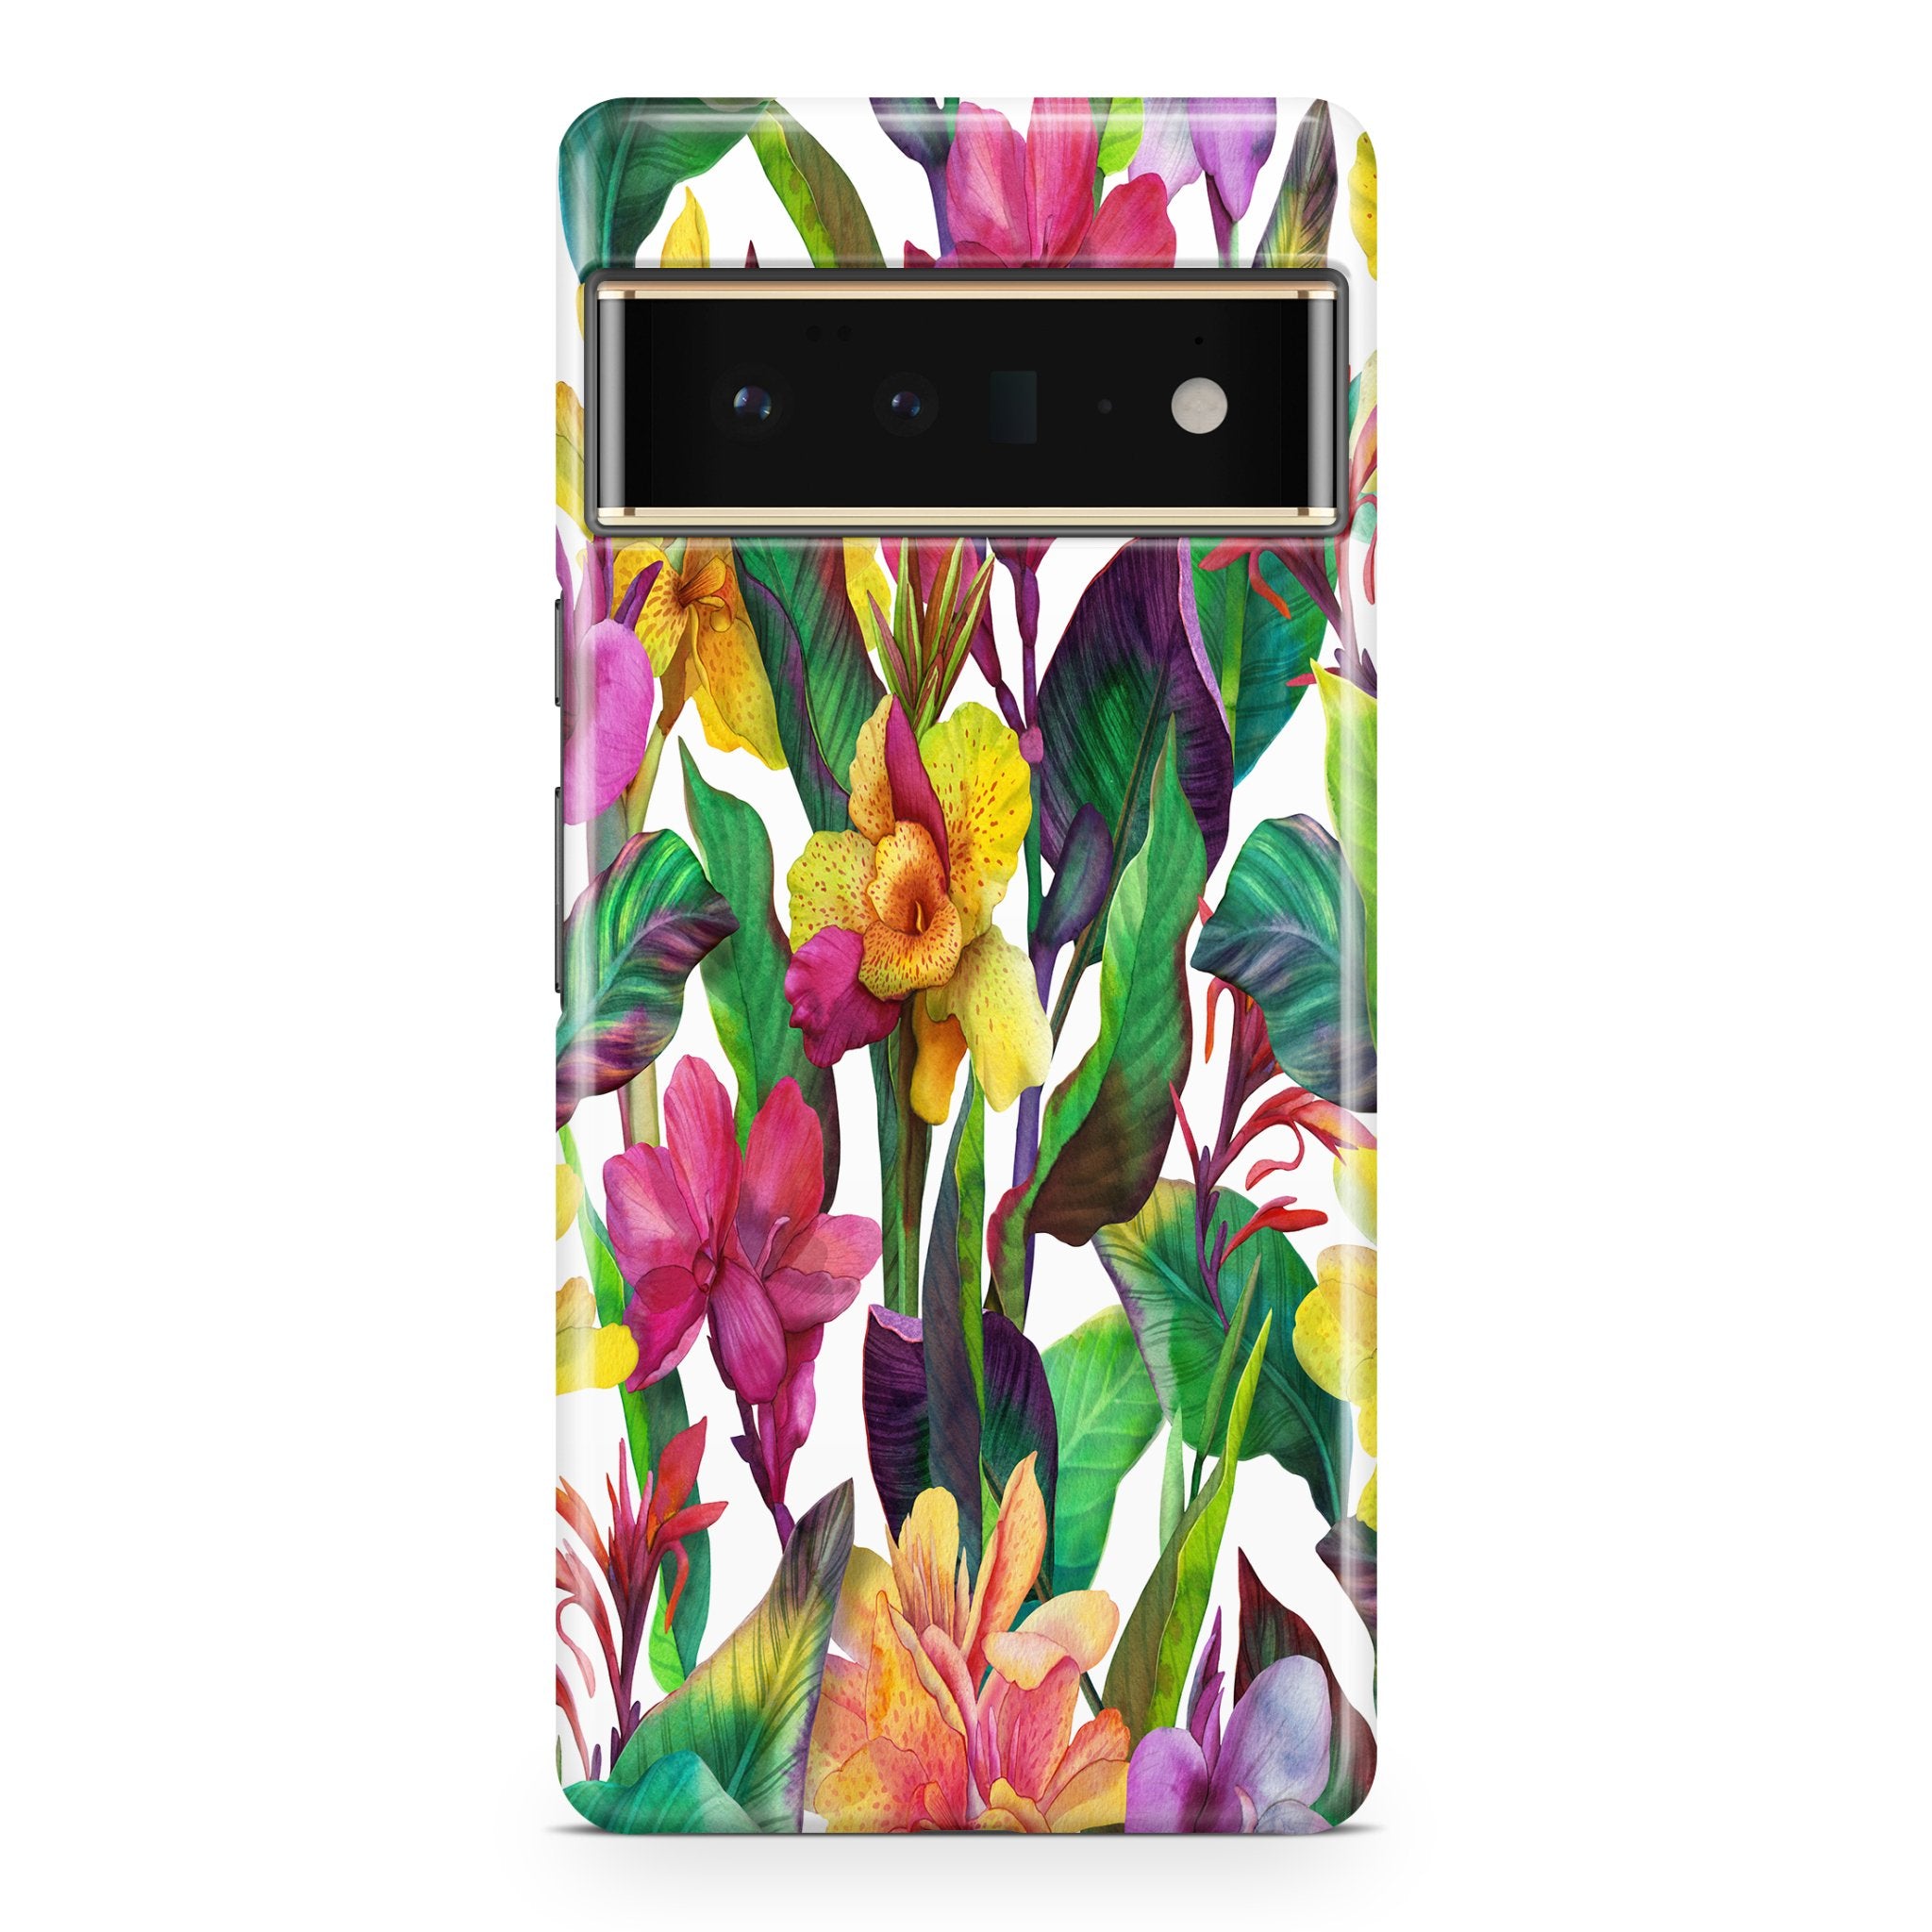 Canna Lily - Google phone case designs by CaseSwagger